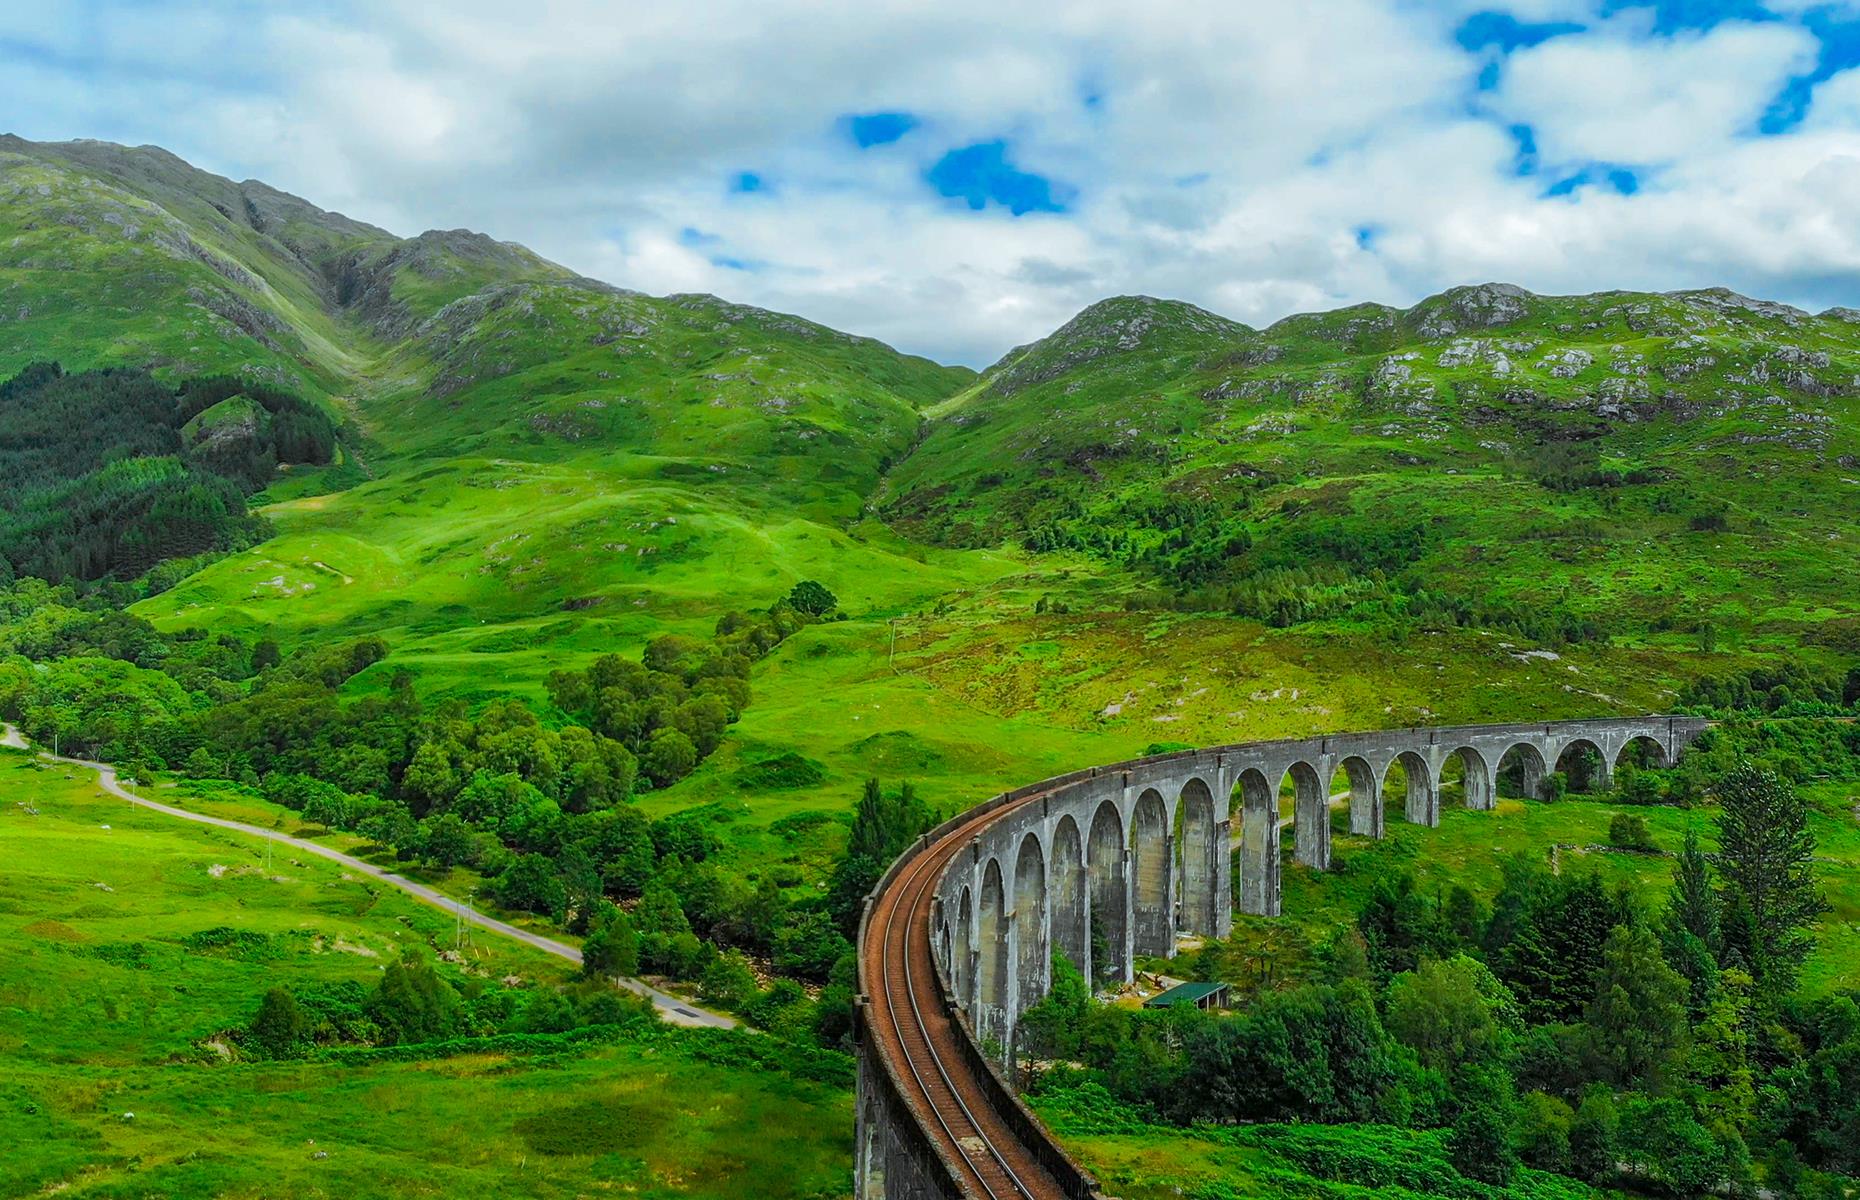 World's most SCENIC train journeys that don’t cost the earth